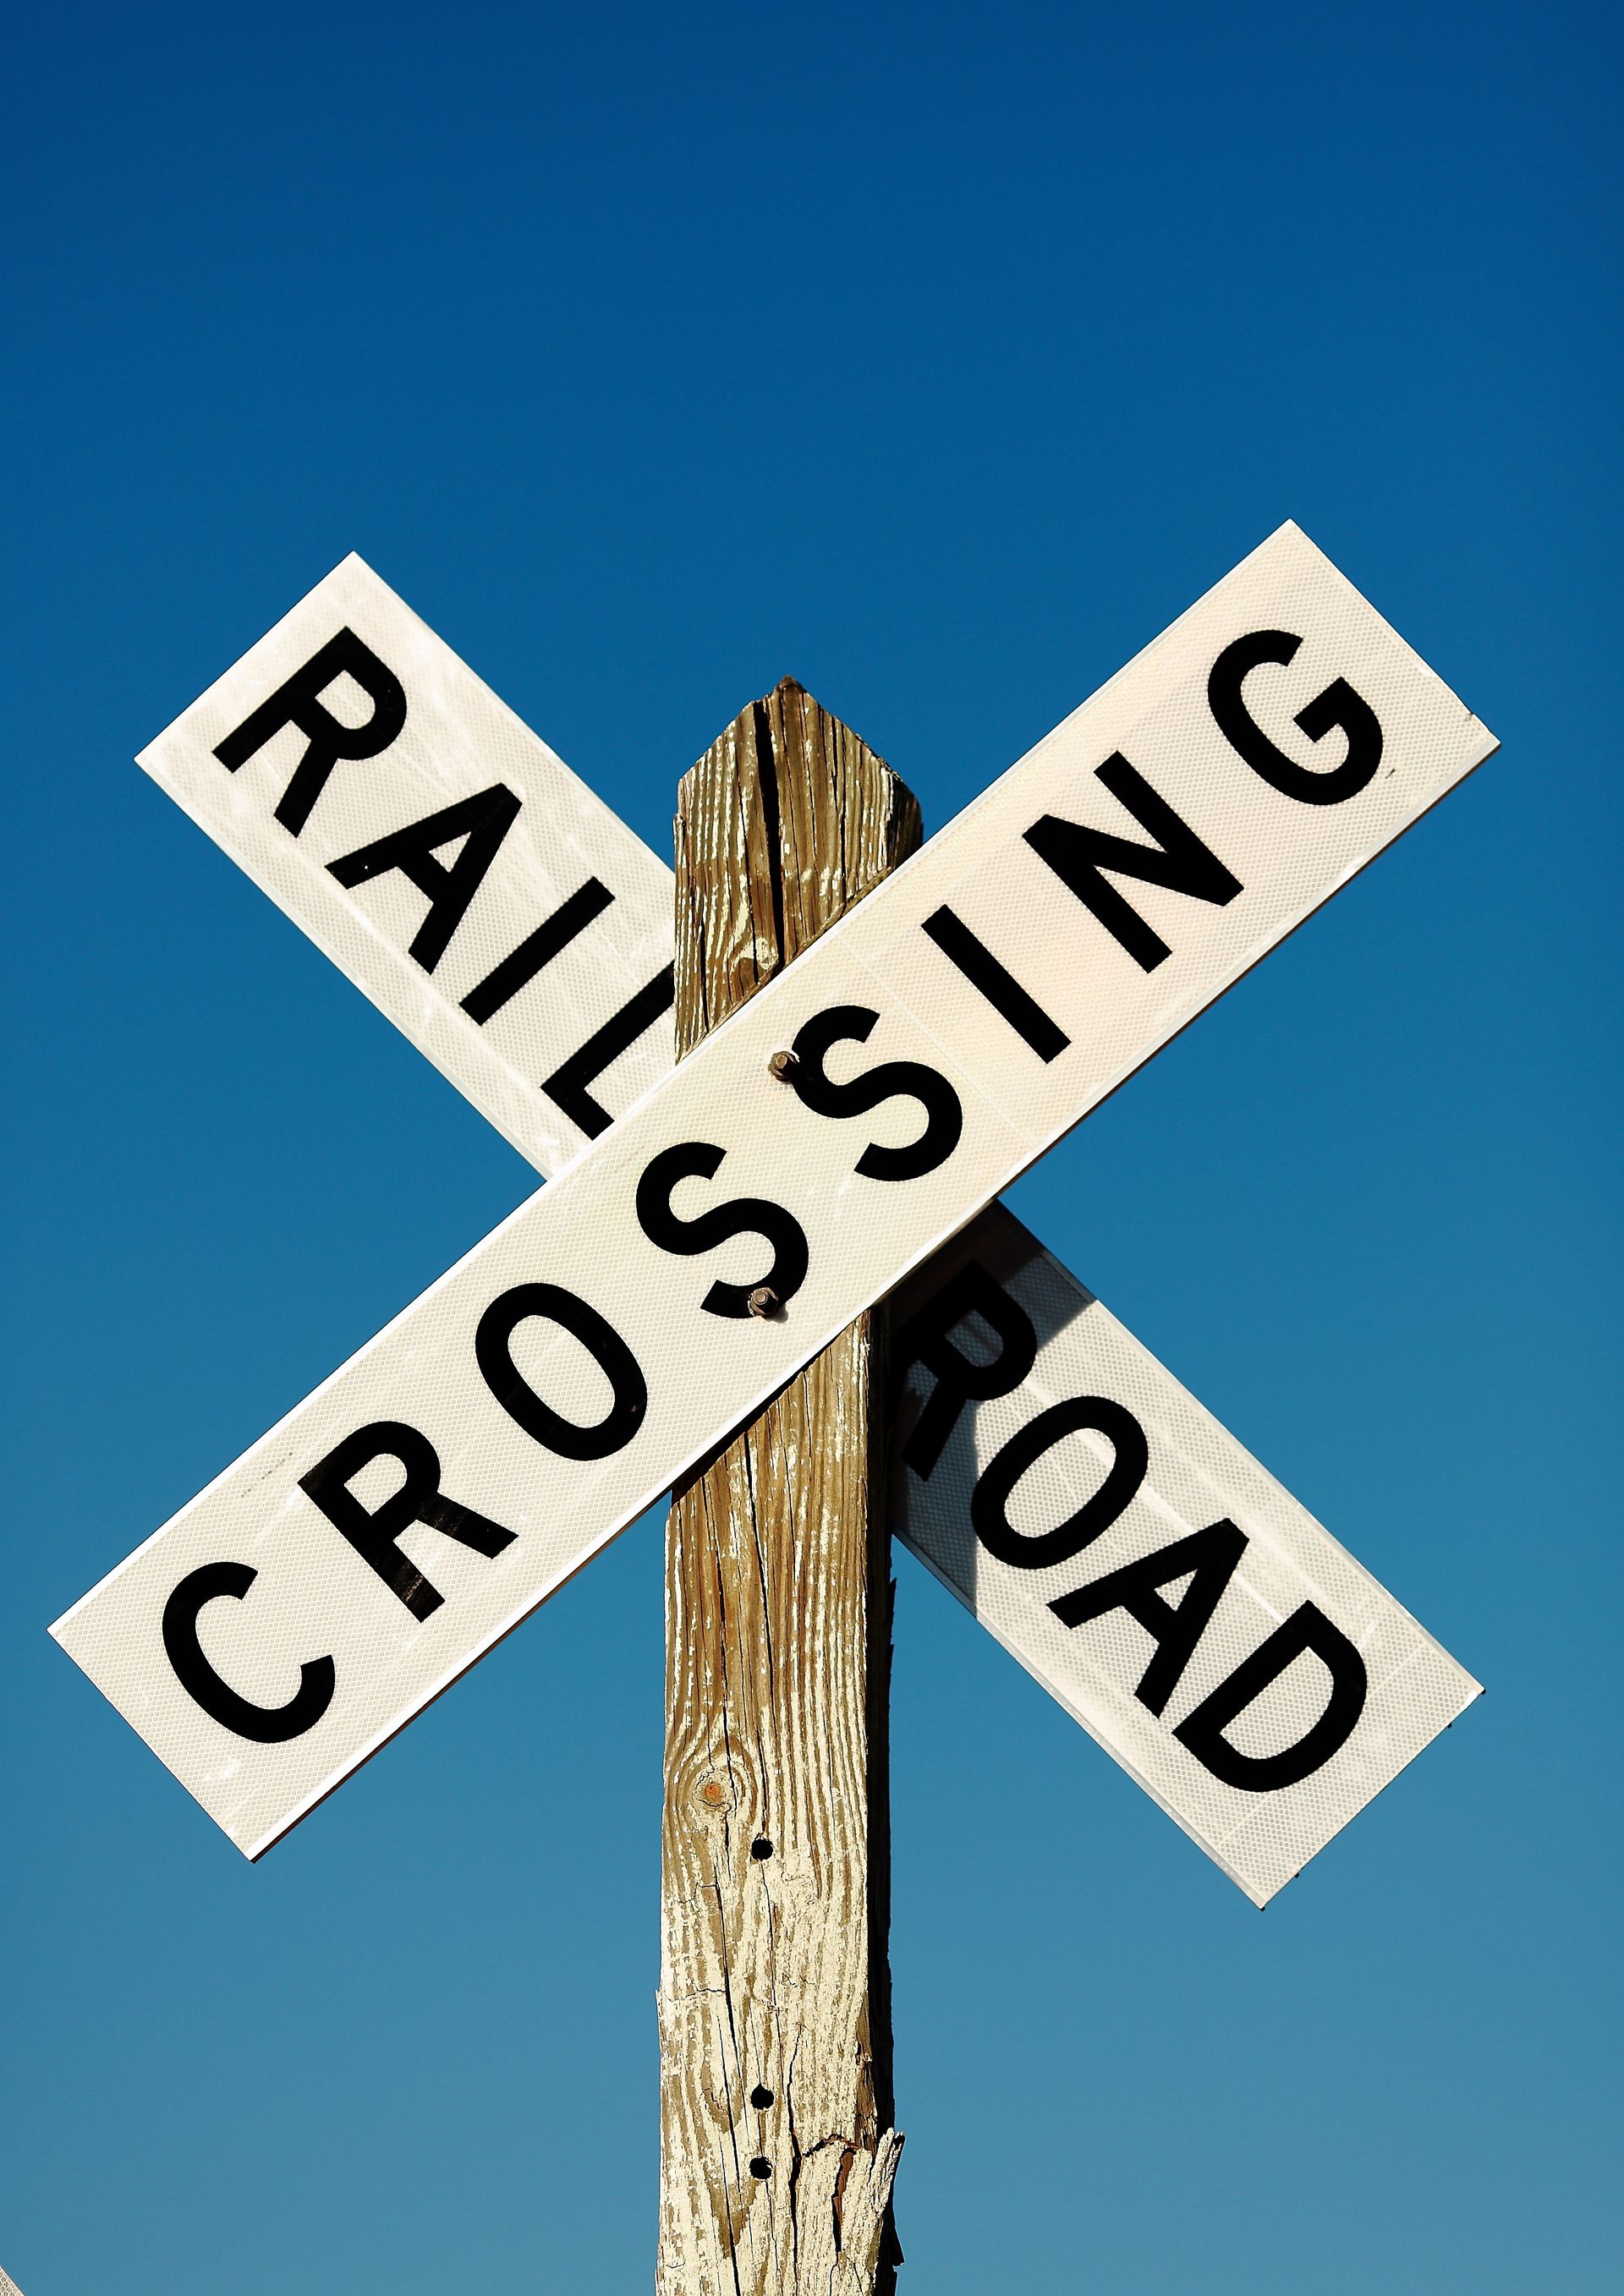 A black and white railroad crossing sign.